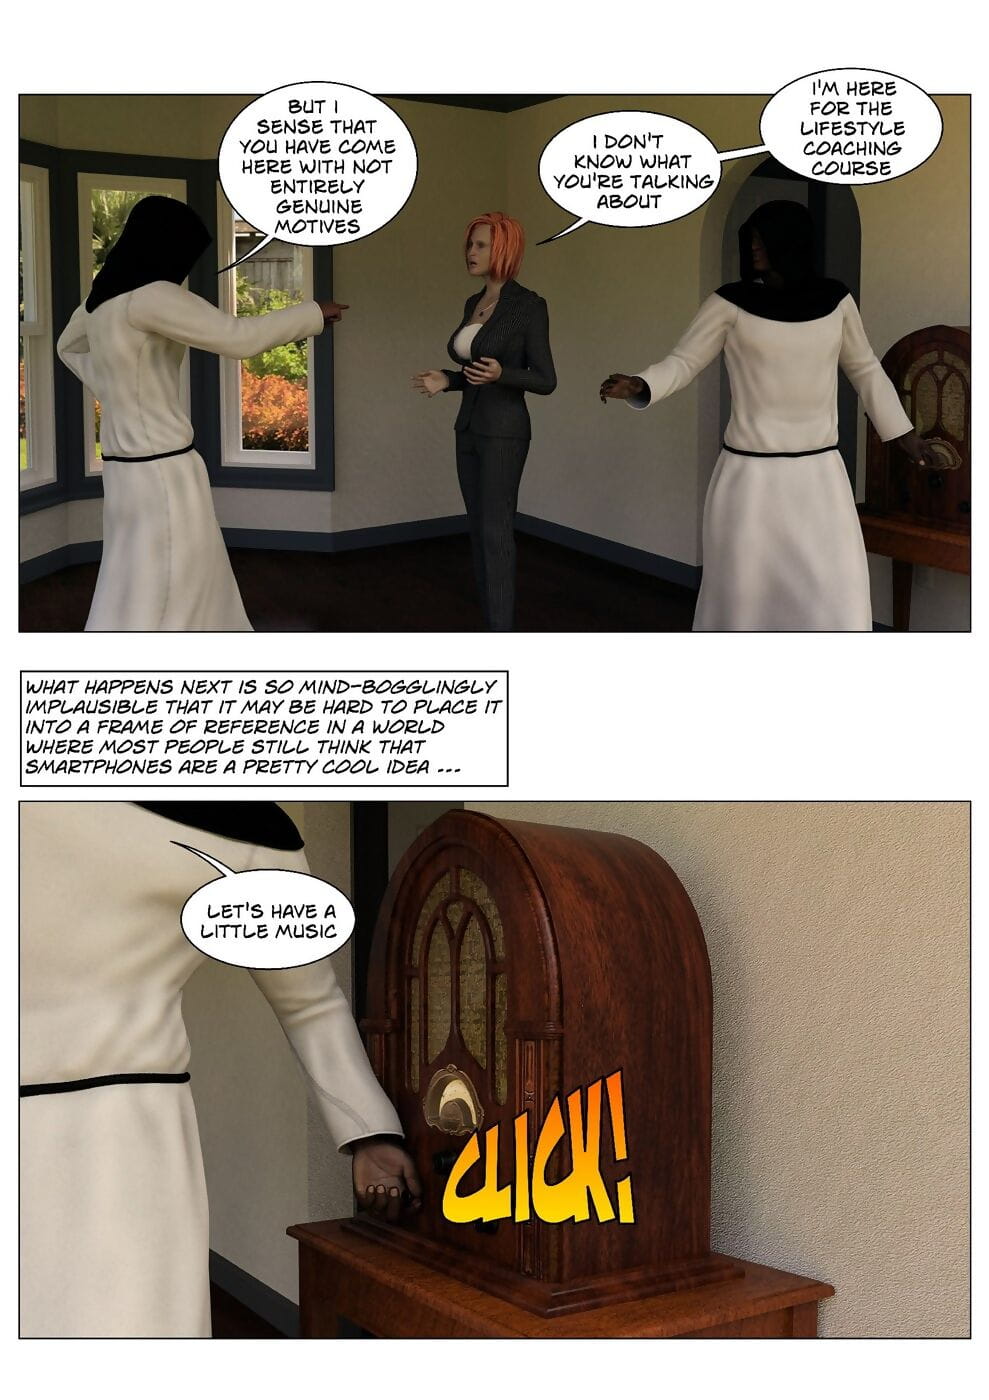 DSV4600- Implausible Things page 1